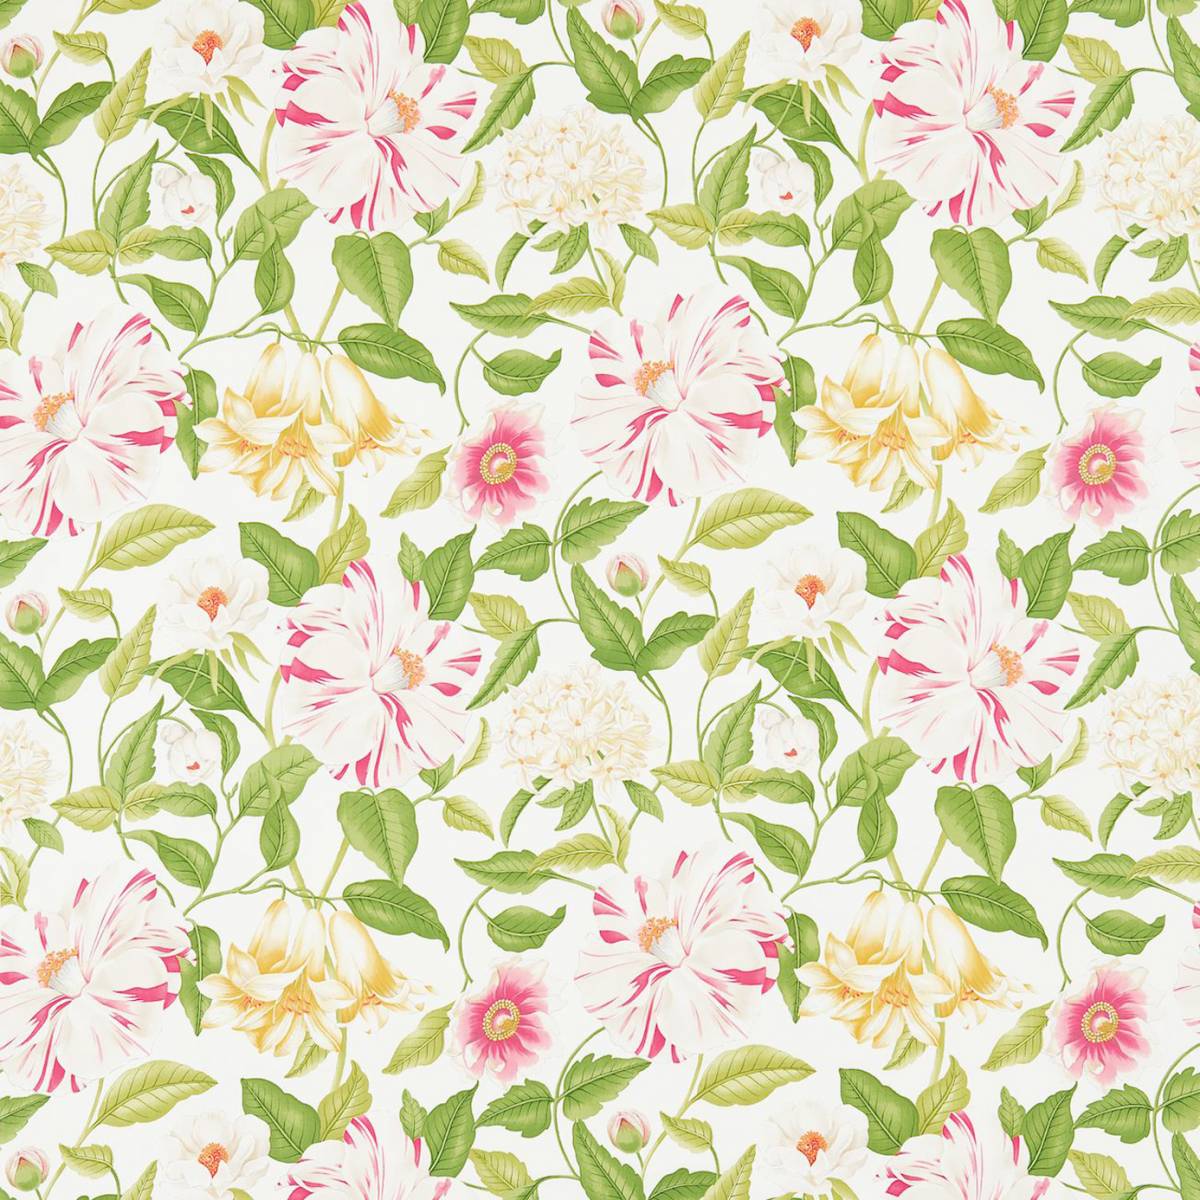 Floreanna Fabric - Chintz (223285) - Sanderson Voyage of Discovery ...